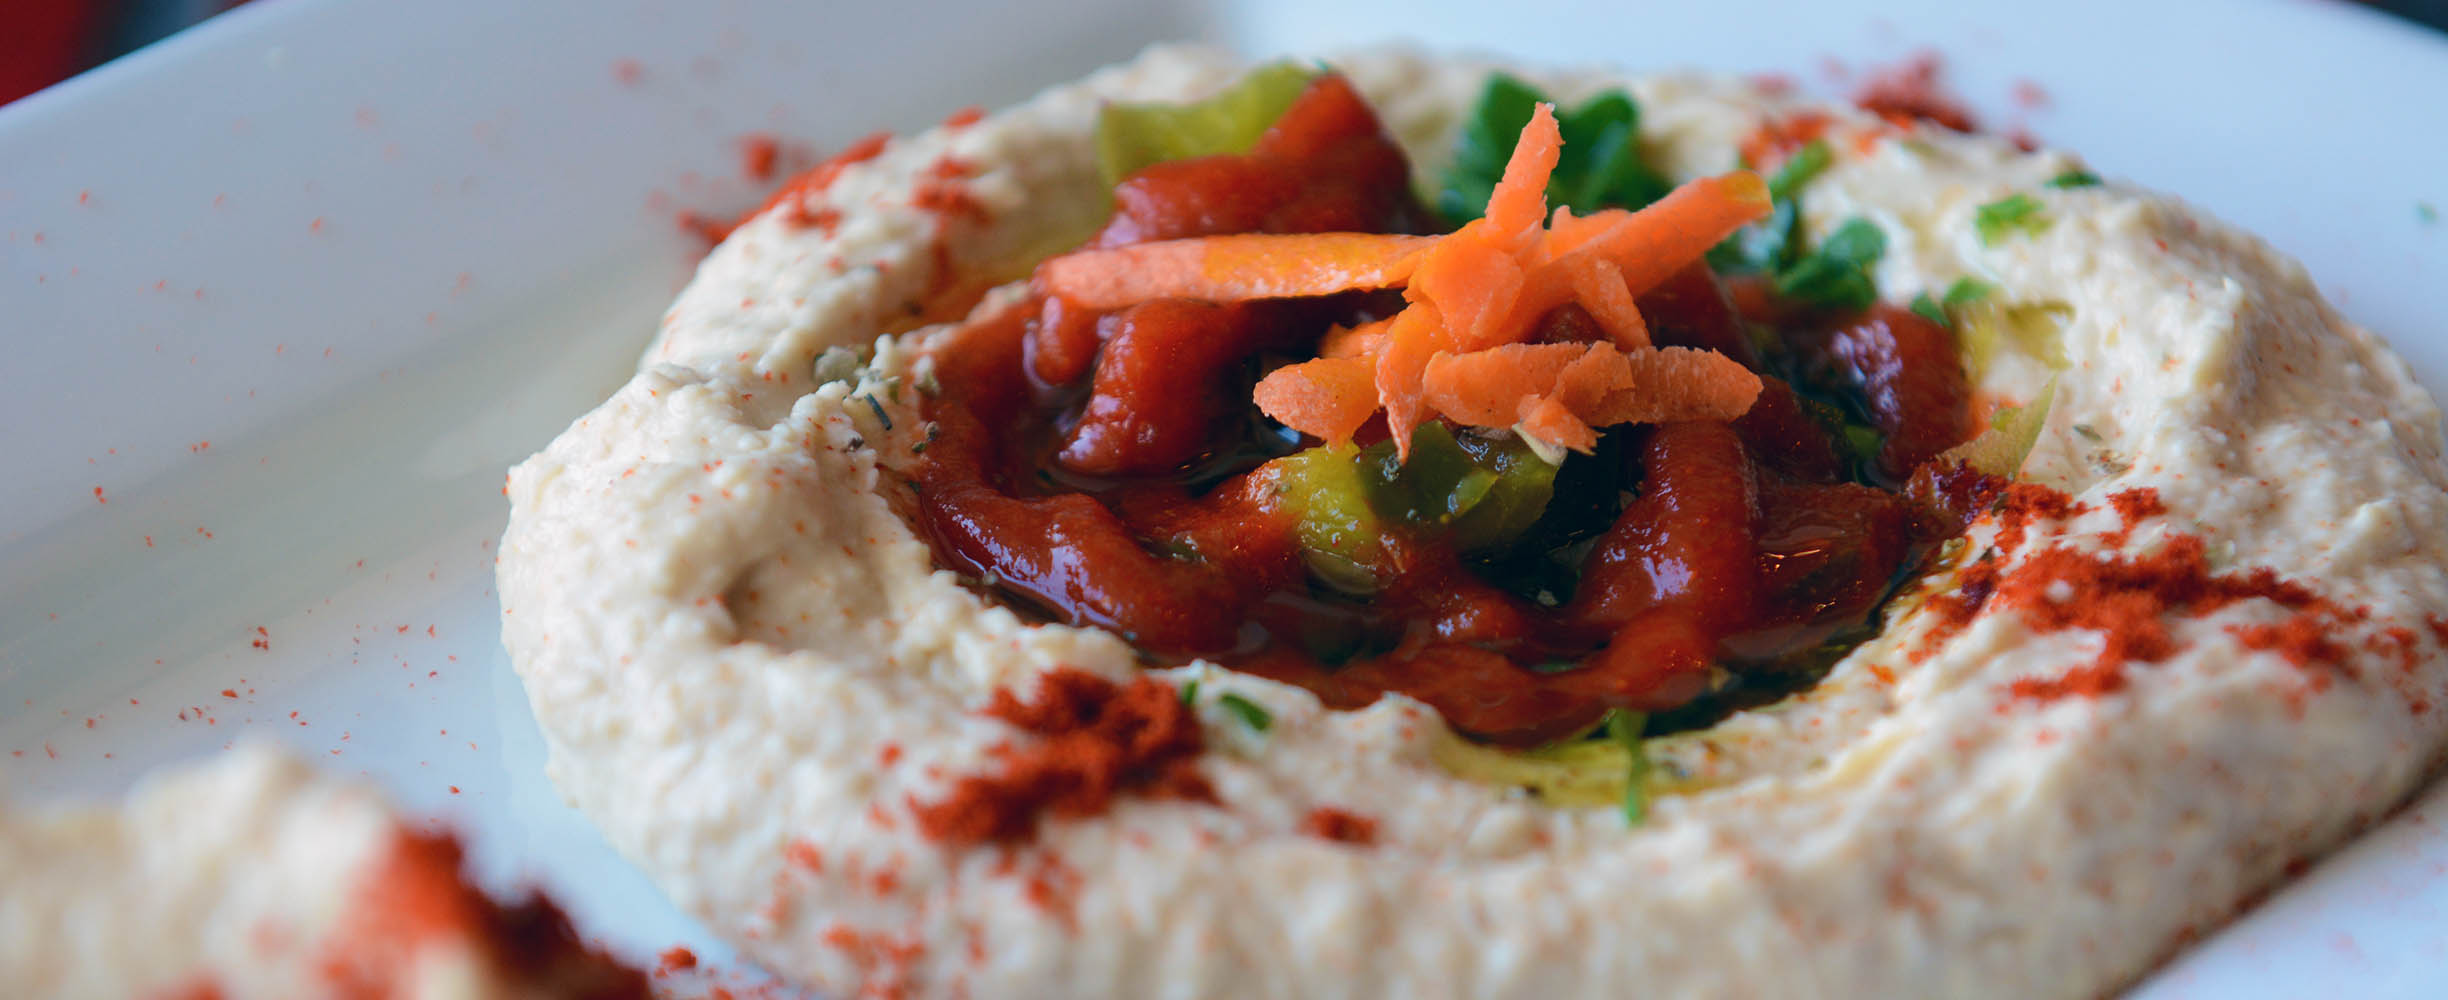 Hummus, a staple Meditearranean food, is customized and enhanced with bell peppers, olives, and other vegetables and spices. This makes a gourmet huumus!